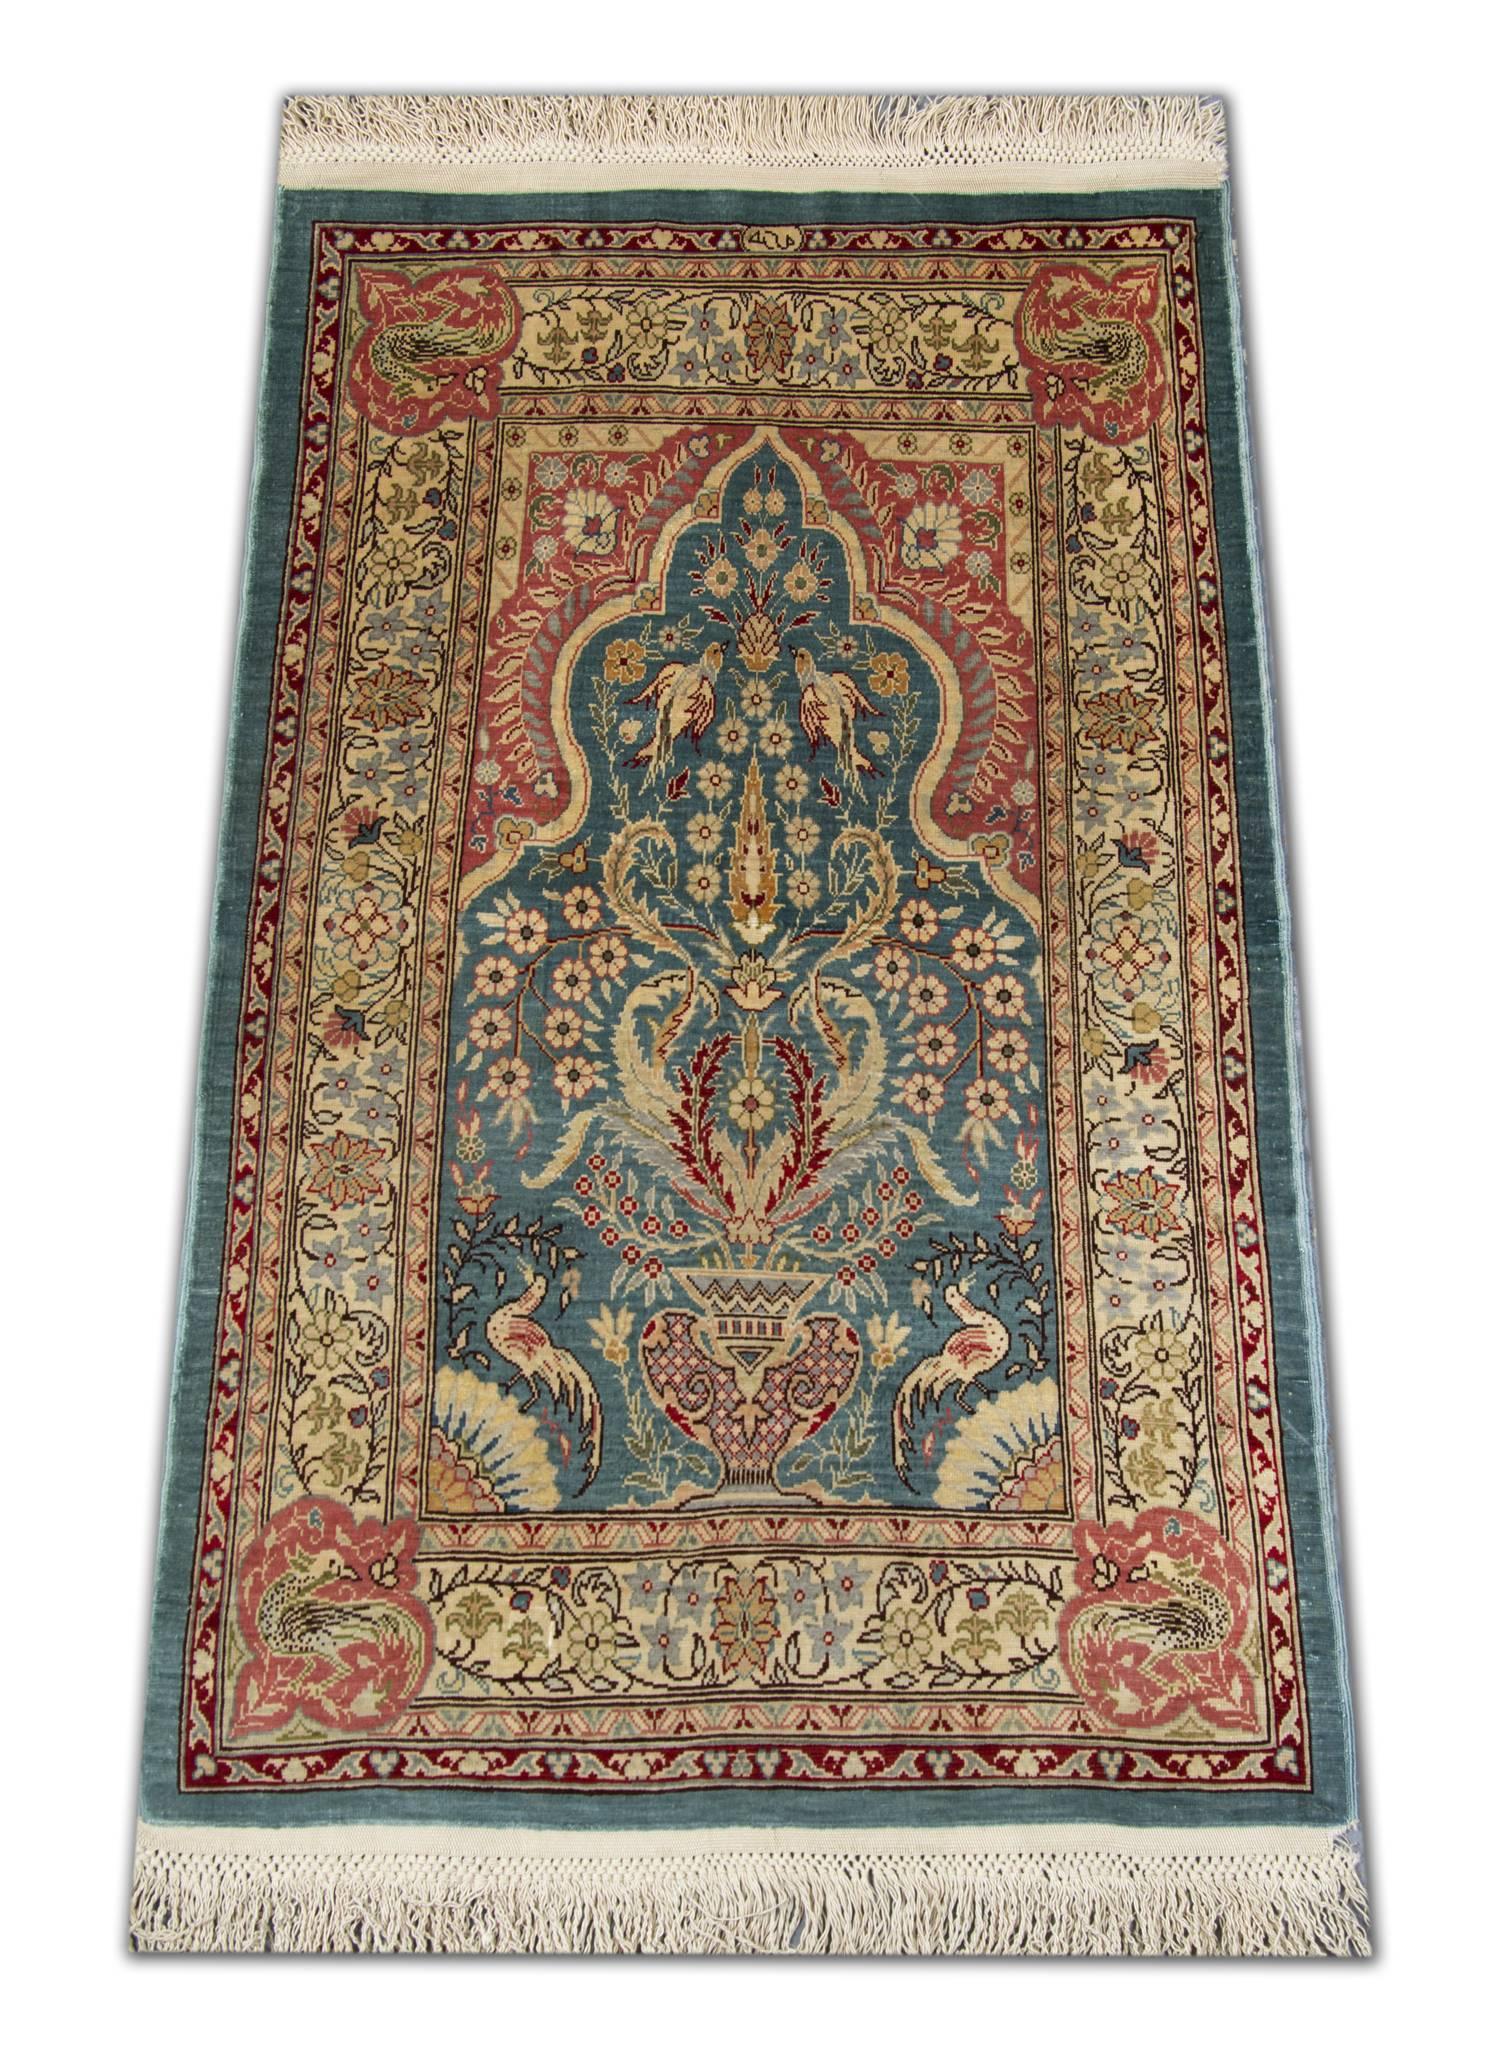 Turkish silk Hereke Oriental rug. This Fine hand-knotted carpet features a lustrous short silk pile with a vase design at one end of the blue center field, beautiful flower heads at center and an arch at the other end. The central frame is enclosed